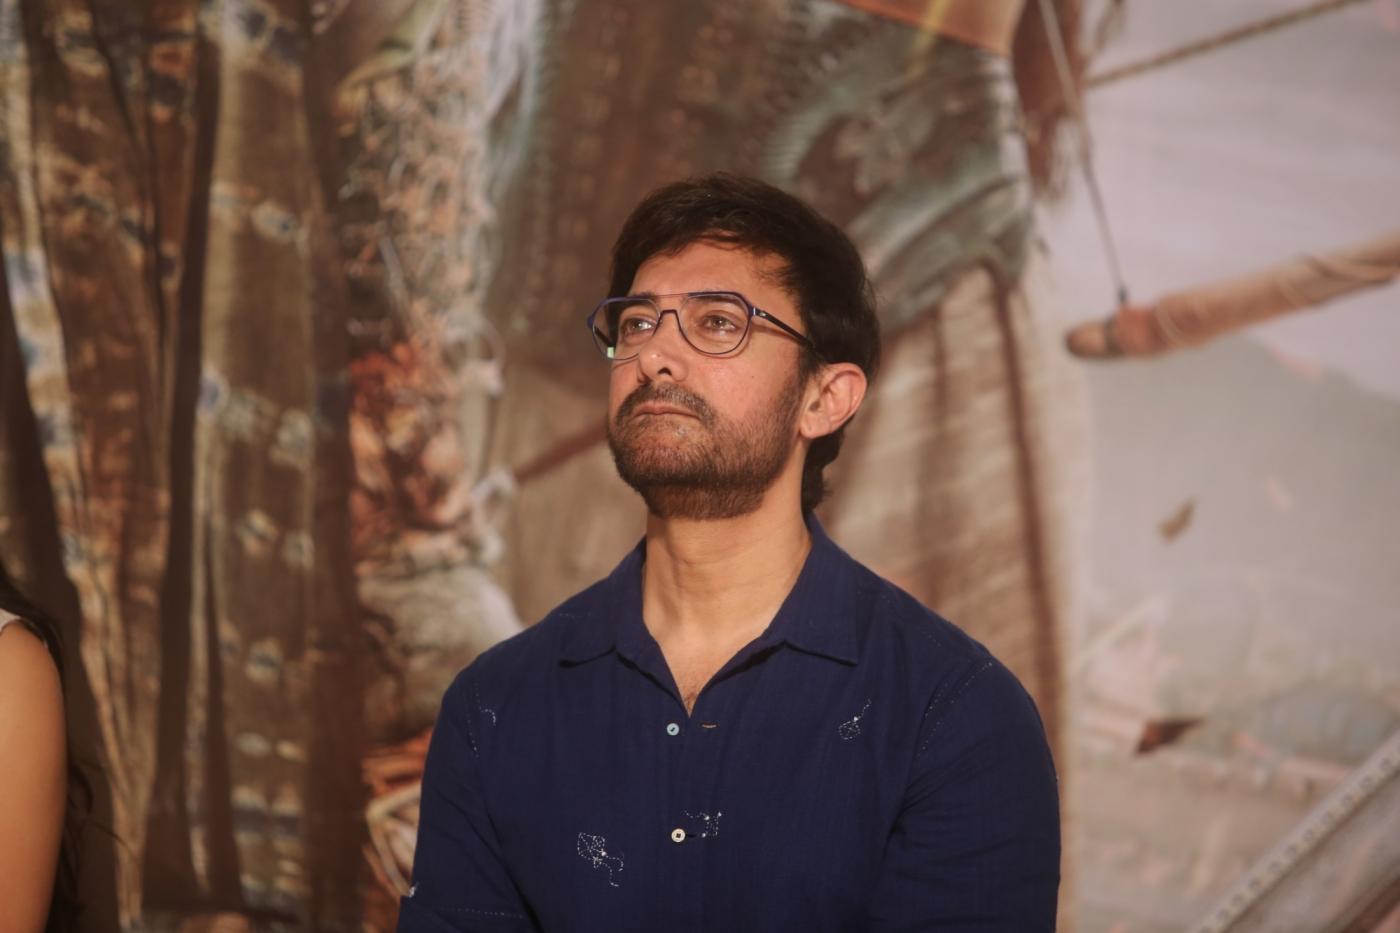 Mumbai: Actor Aamir Khan at the trailer launch of his upcoming film "Thugs of Hindostan" in Mumbai on Sept 27, 2018. (Photo: IANS) by .